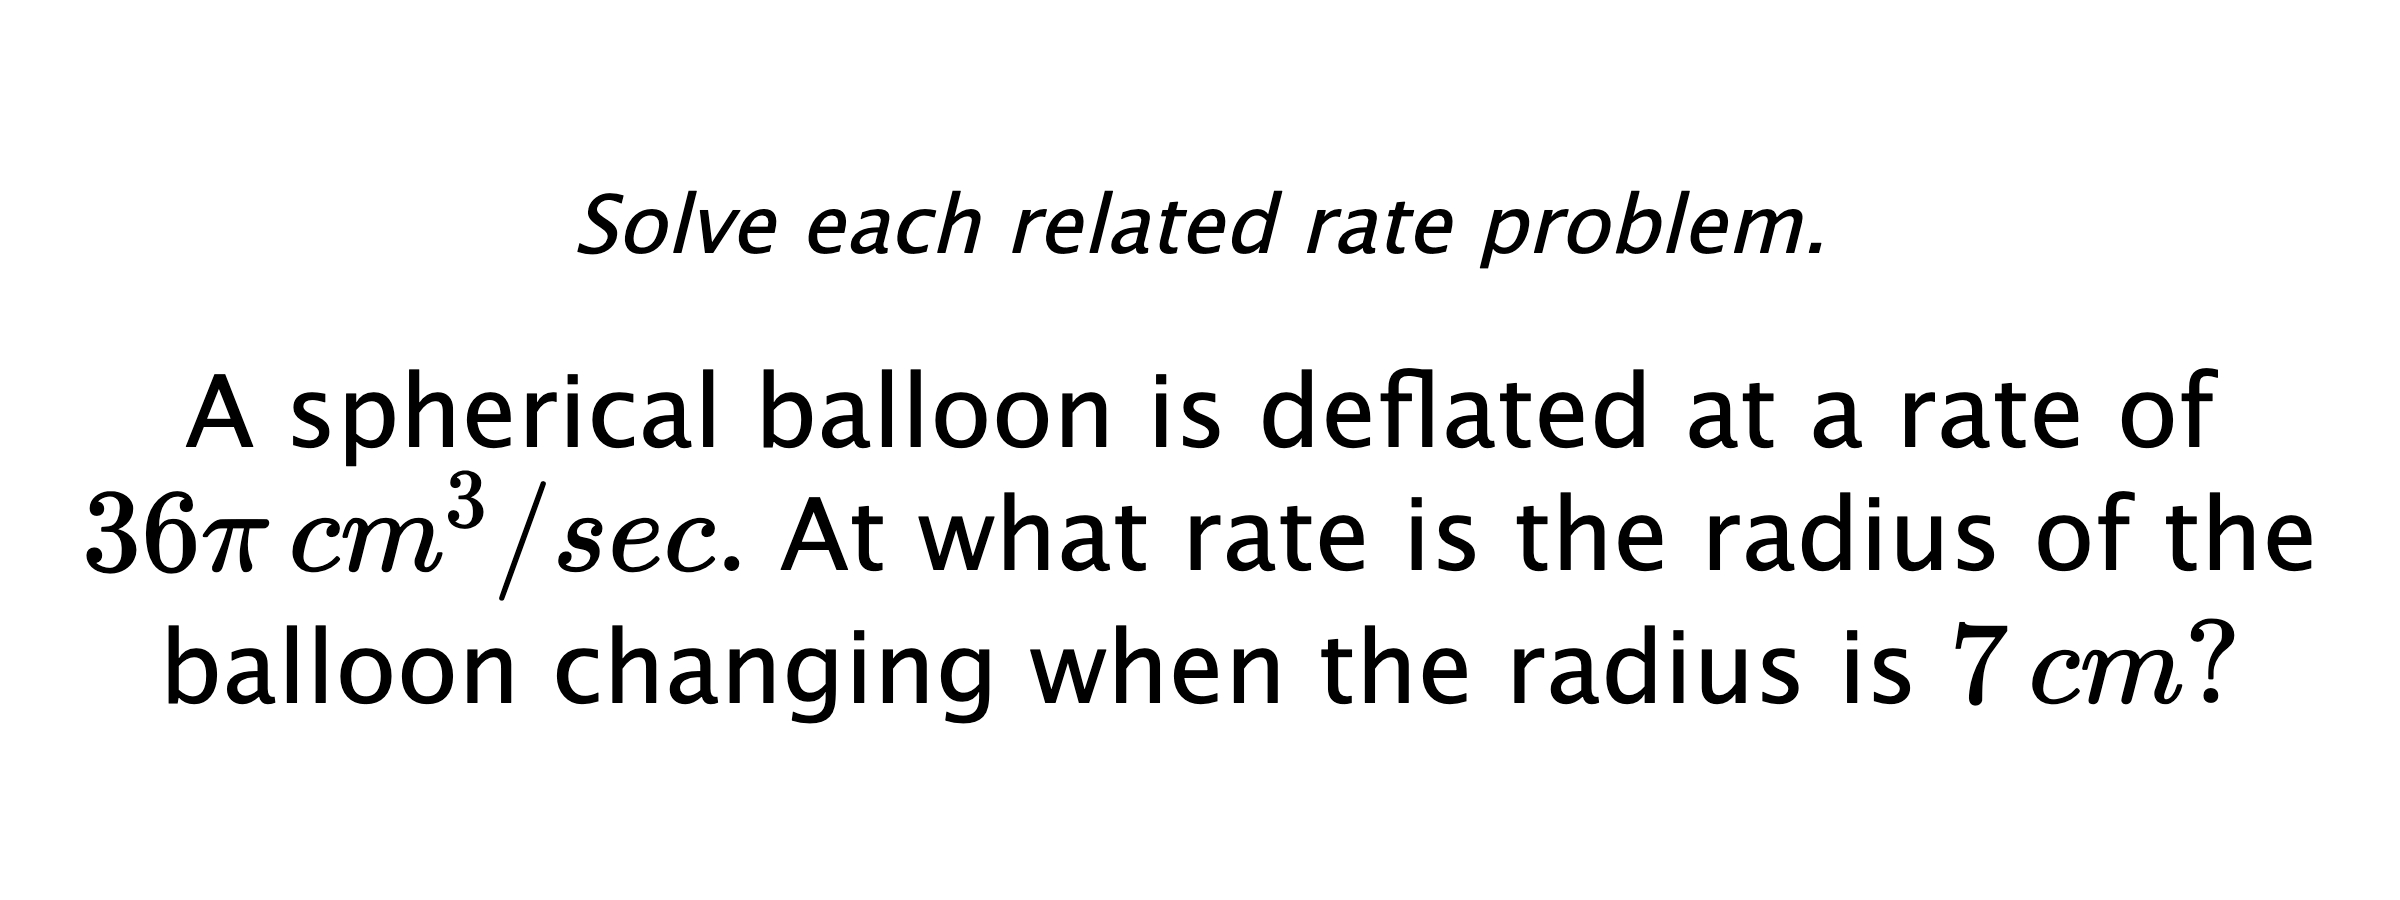 Solve each related rate problem. A spherical balloon is deflated at a rate of $36\pi \,cm^{3}/sec.$ At what rate is the radius of the balloon changing when the radius is $7\,cm?$